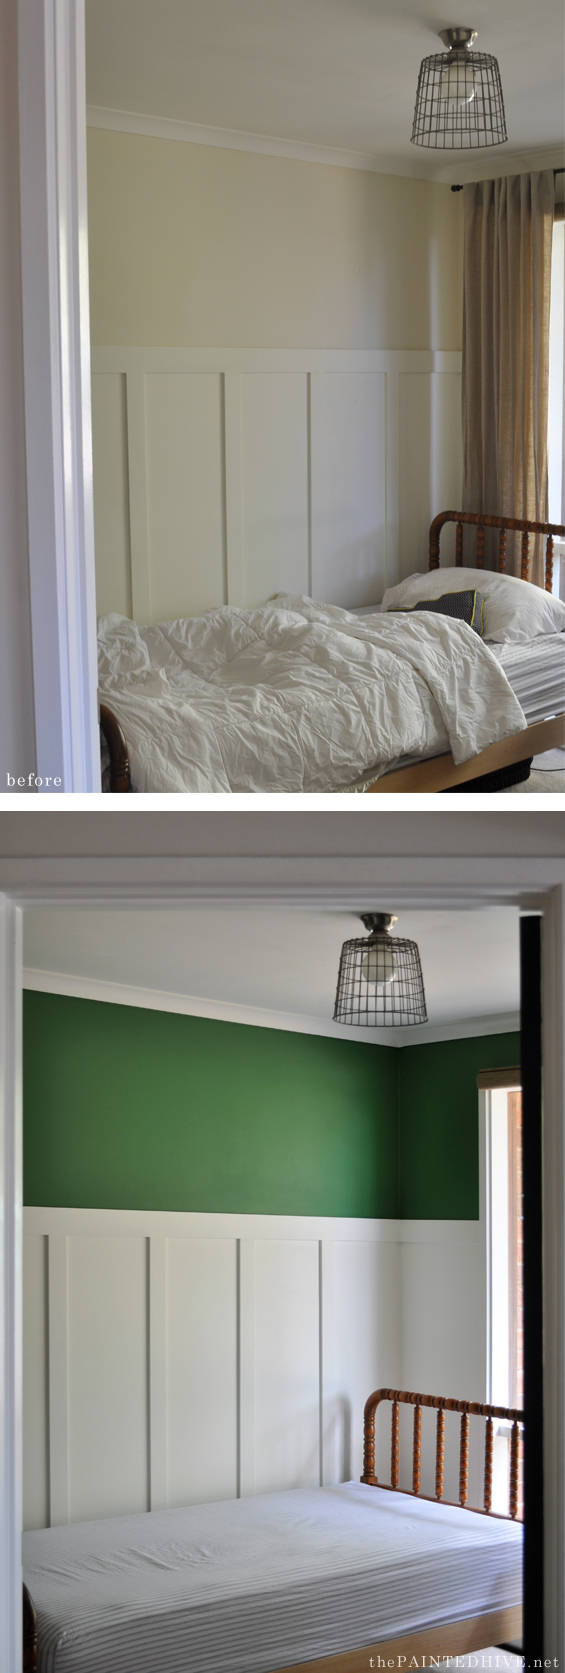 Green Paint Before and After